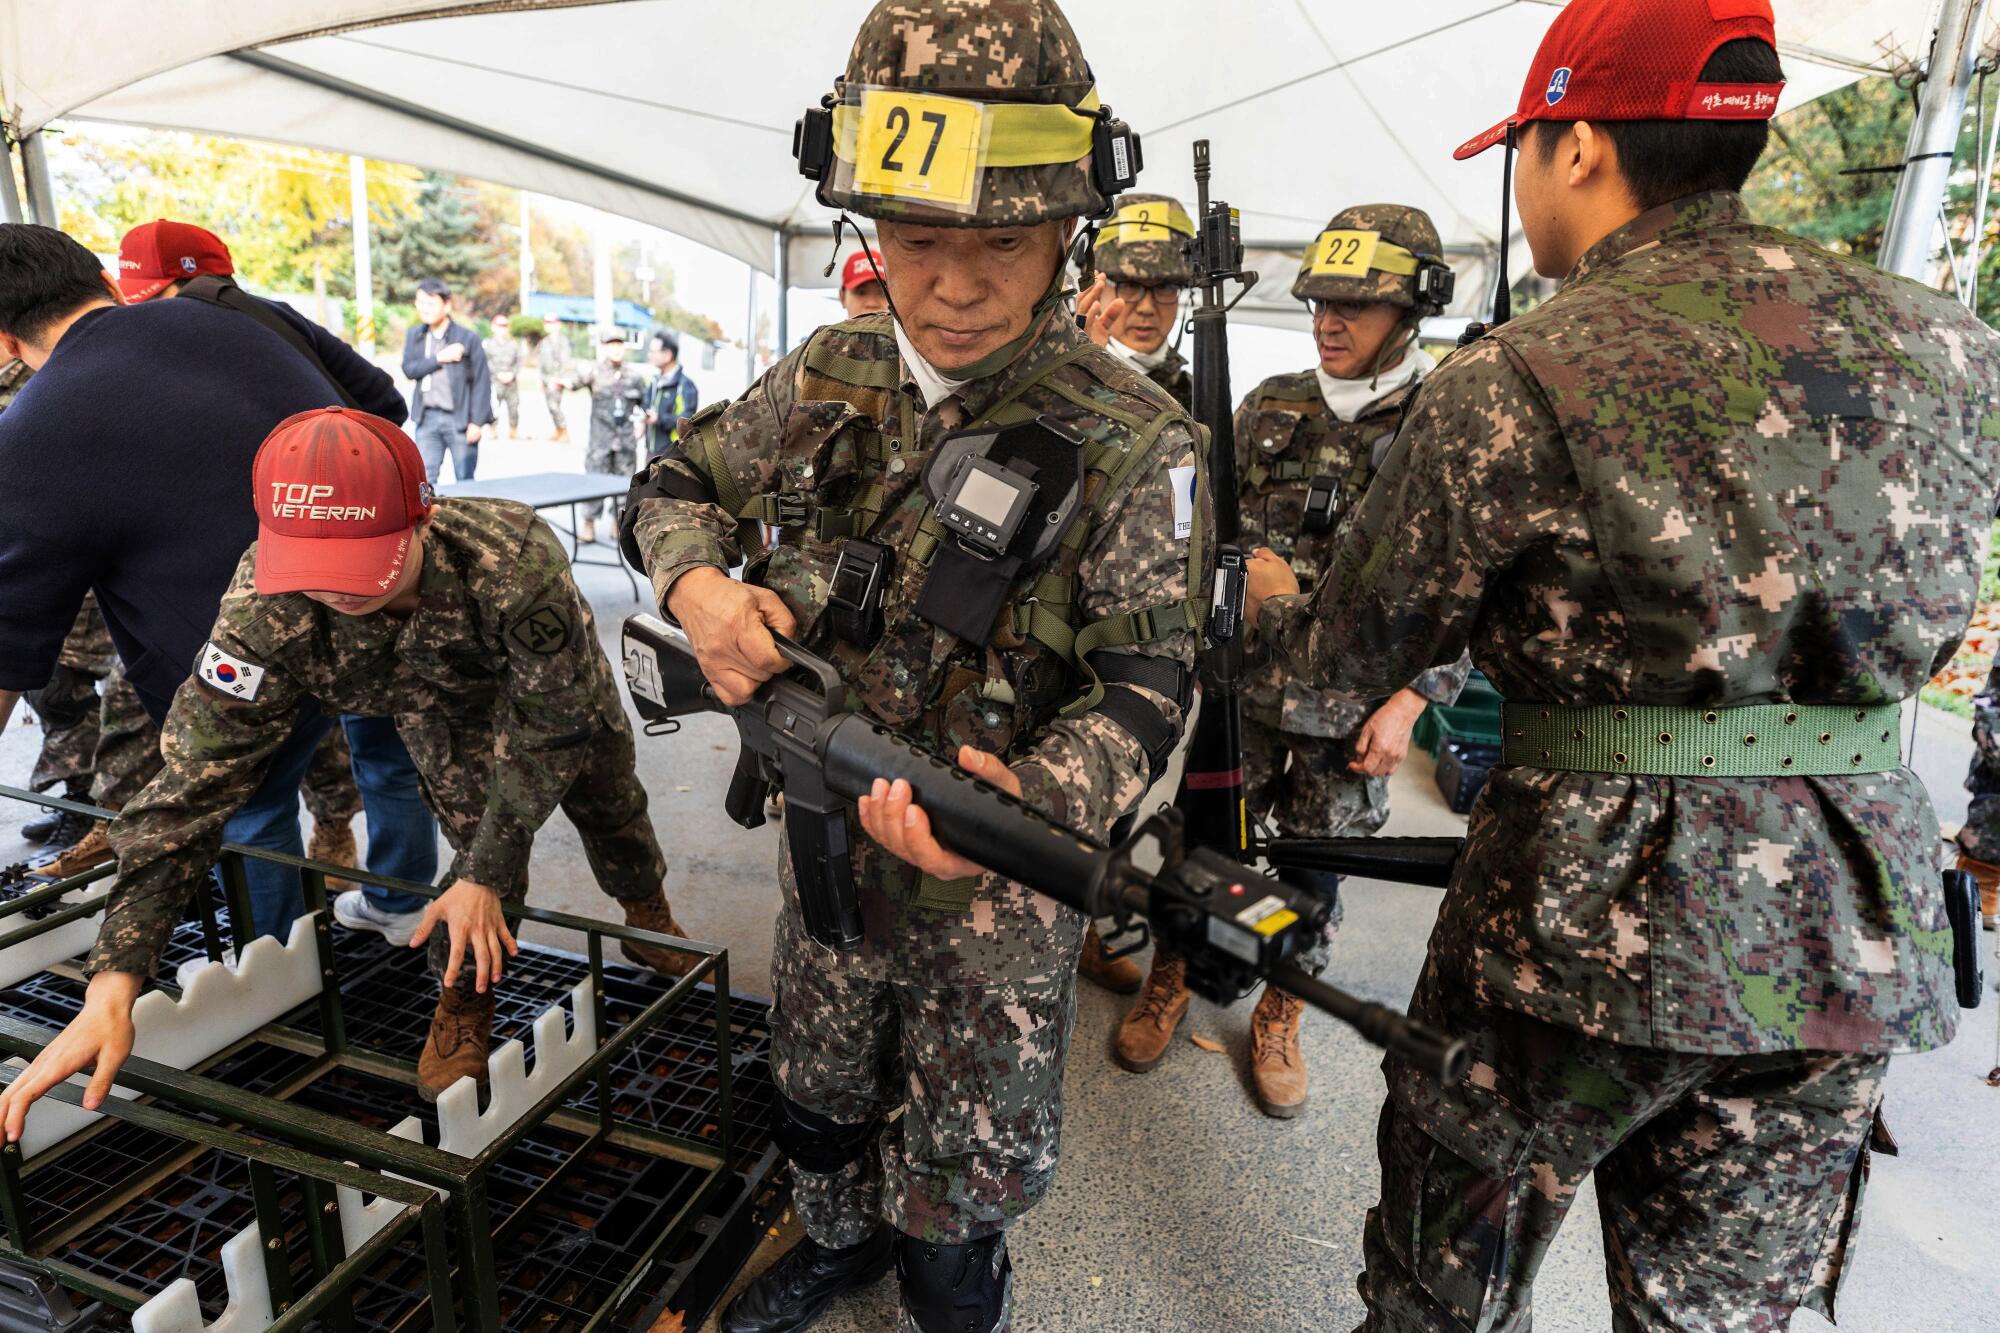 Members of the Senior Army pick up the guns during military training at the Infantry Reserve 